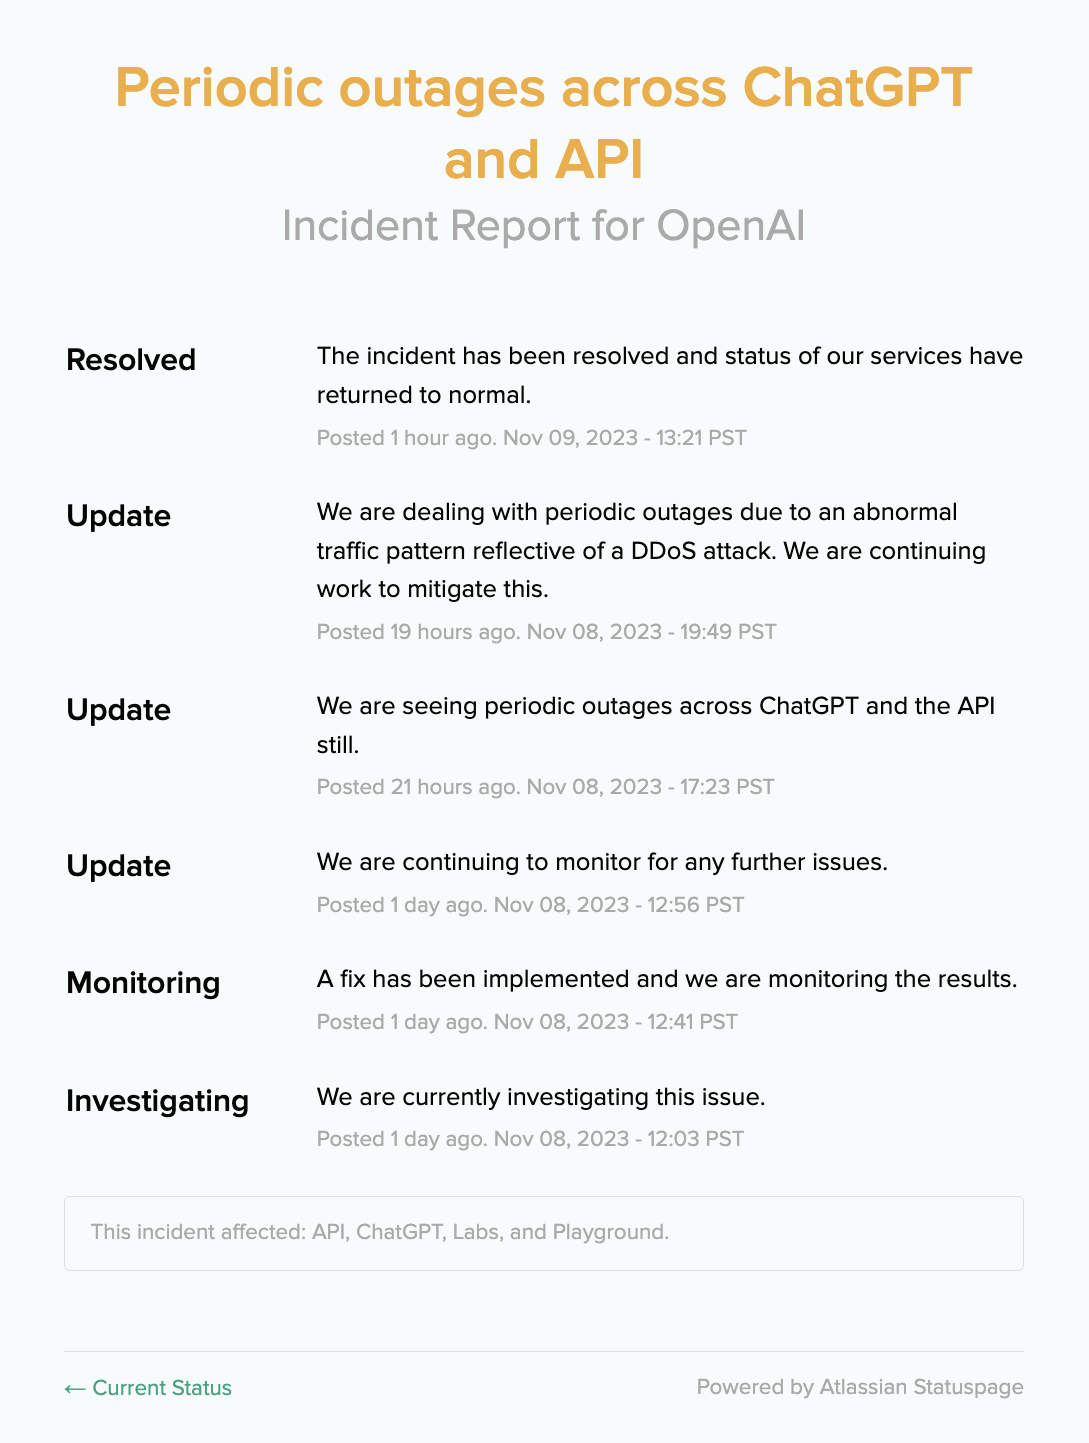 OpenAI Resolves Periodic ChatGPT And API Outages Caused By DDoS Attacks